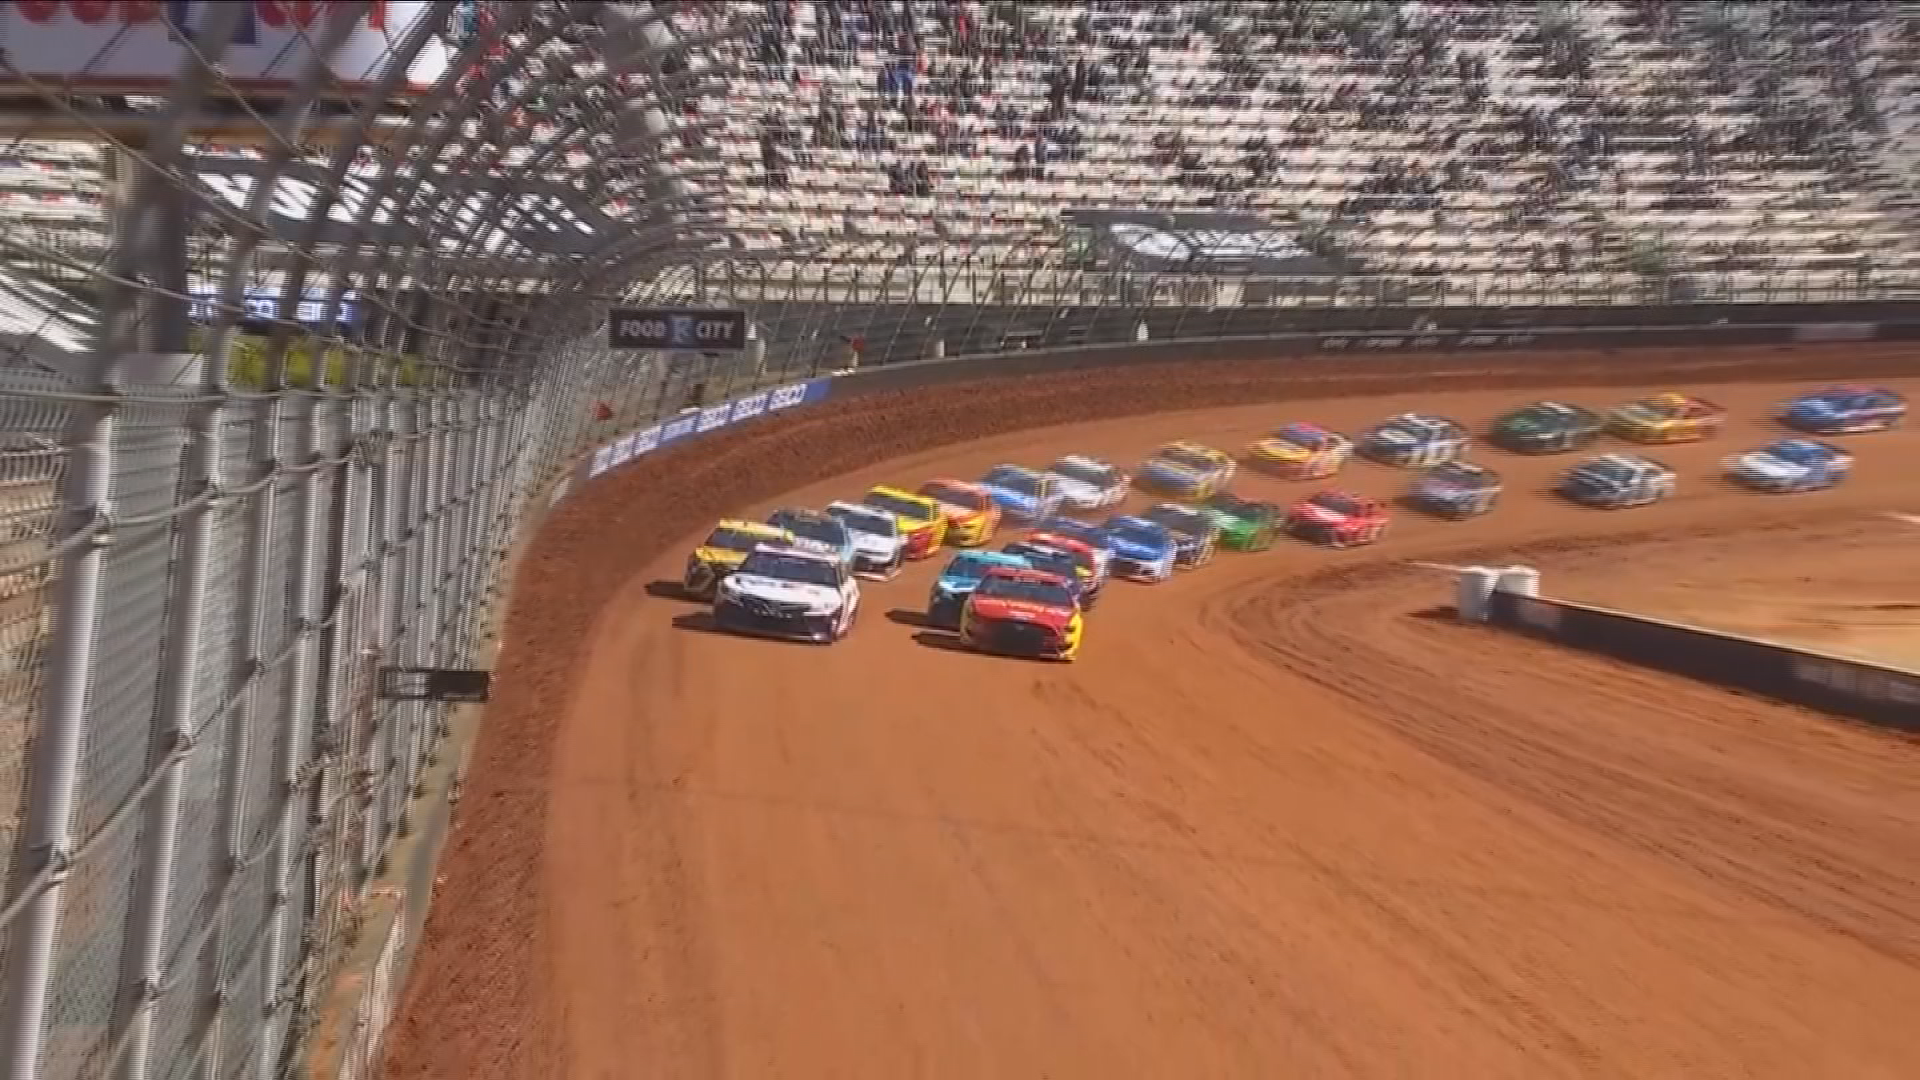 NASCAR chases holiday TV audience with Easter dirt race